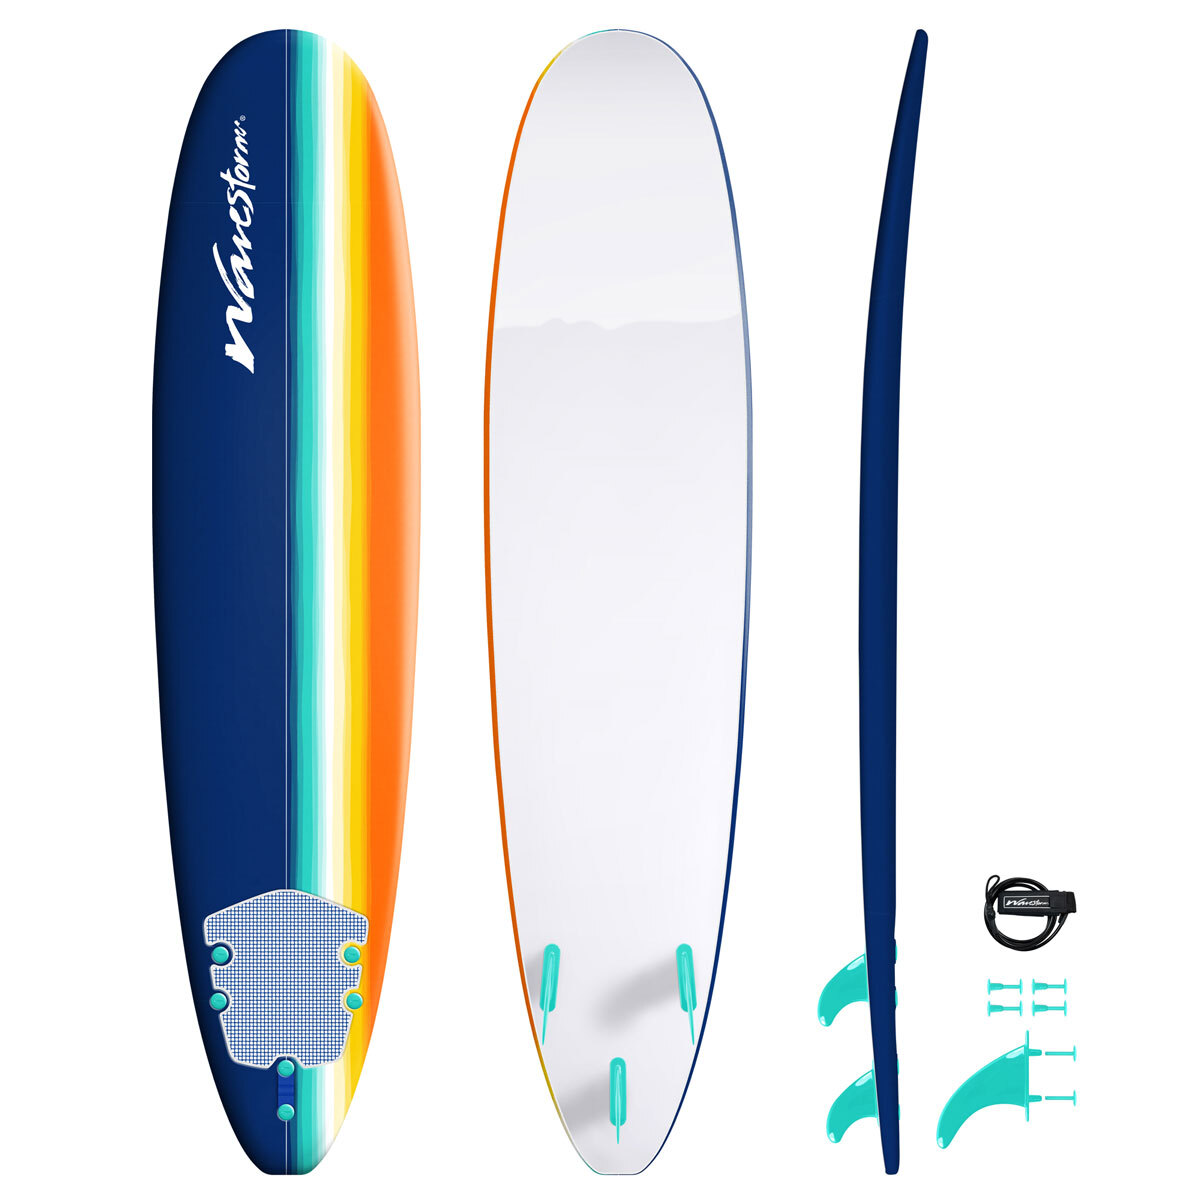 Wavestorm™ 8ft Classic Surfboard in Blue & White Beginner And Experienced Surfer 